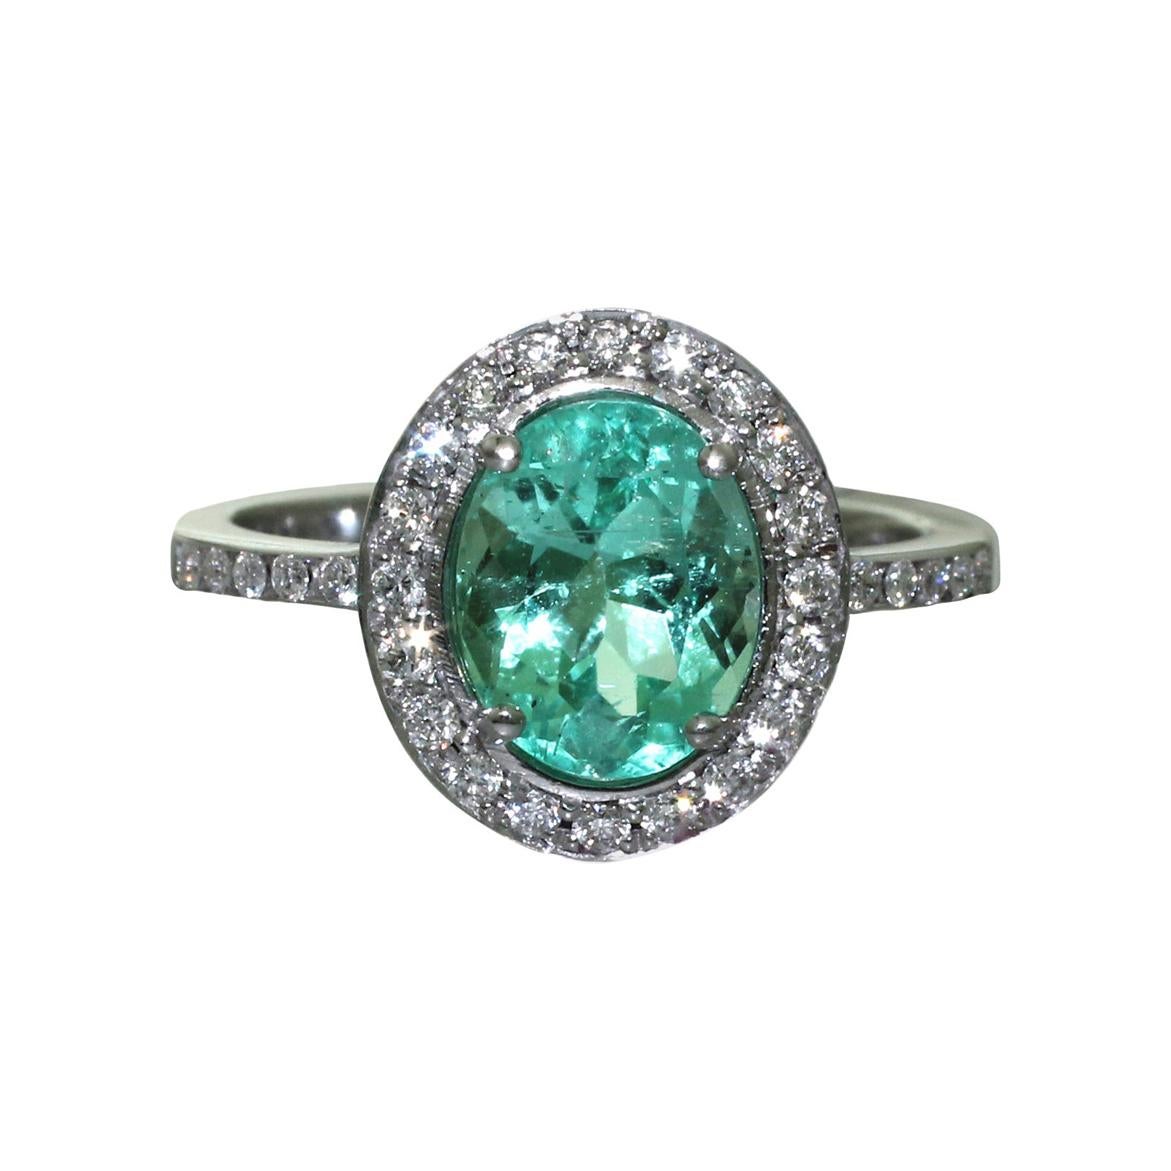 Oval Emerald and Diamonds, 18 Karat White Gold Wedding and Engagement Ring